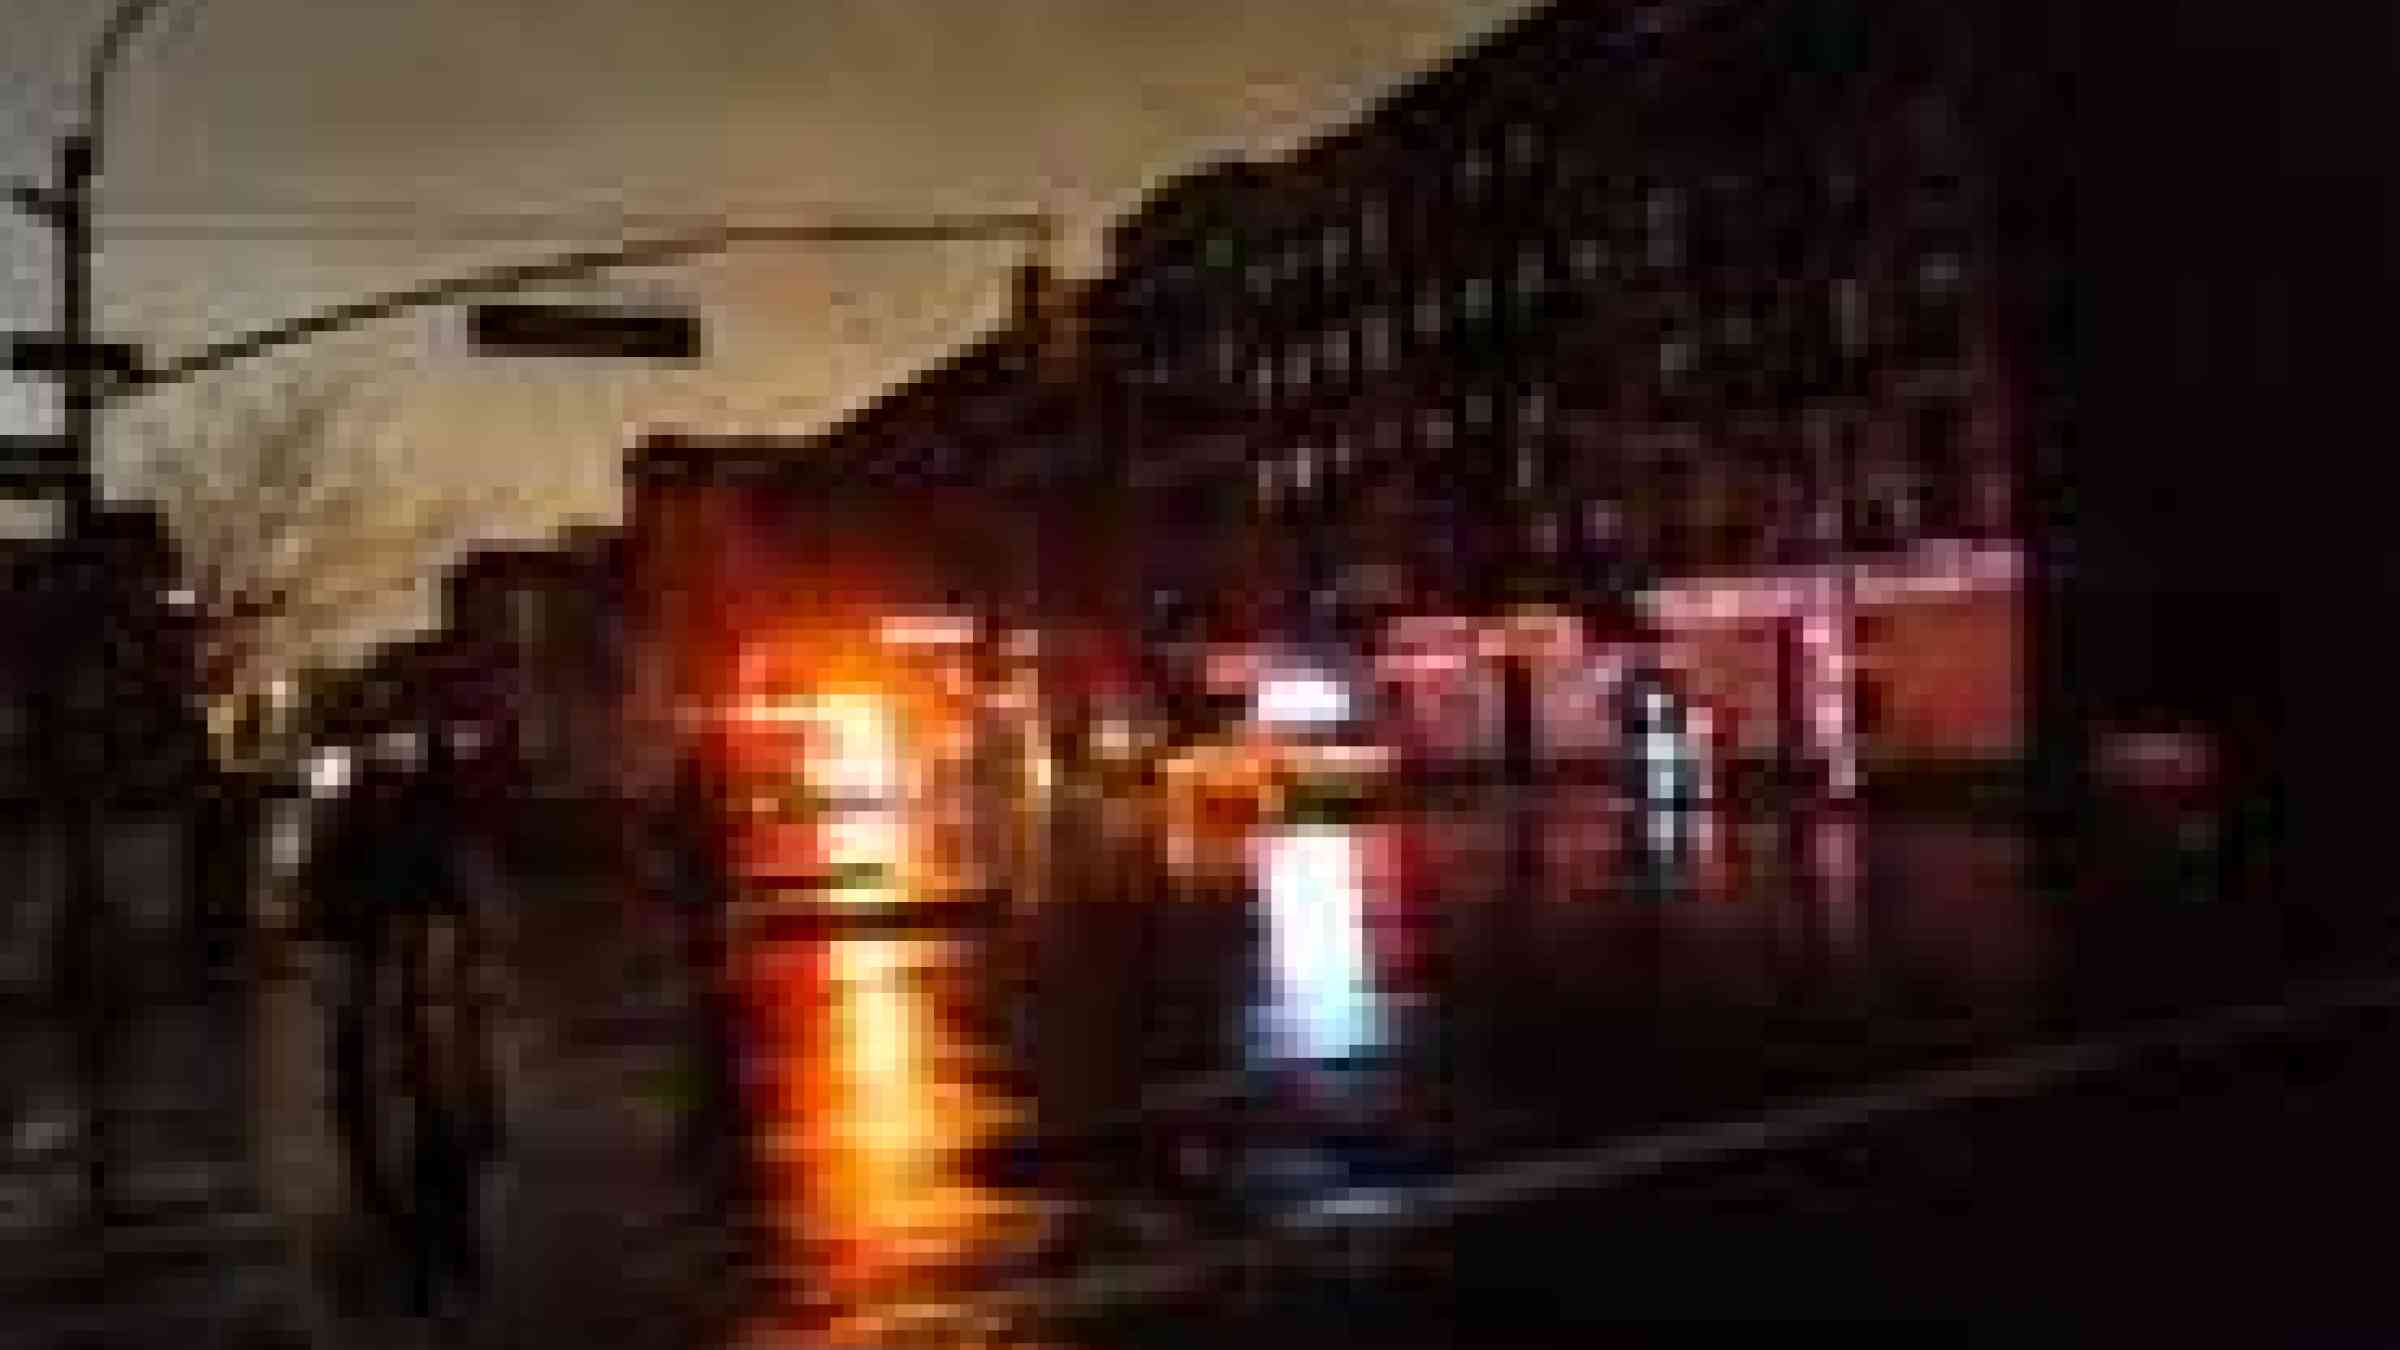 Hurricane Sandy East Village, NYC blackout photo by flickr user Dan Nguyen @ New York City, CC BY-NC 2.0 , http://www.flickr.com/photos/zokuga/8138864969/